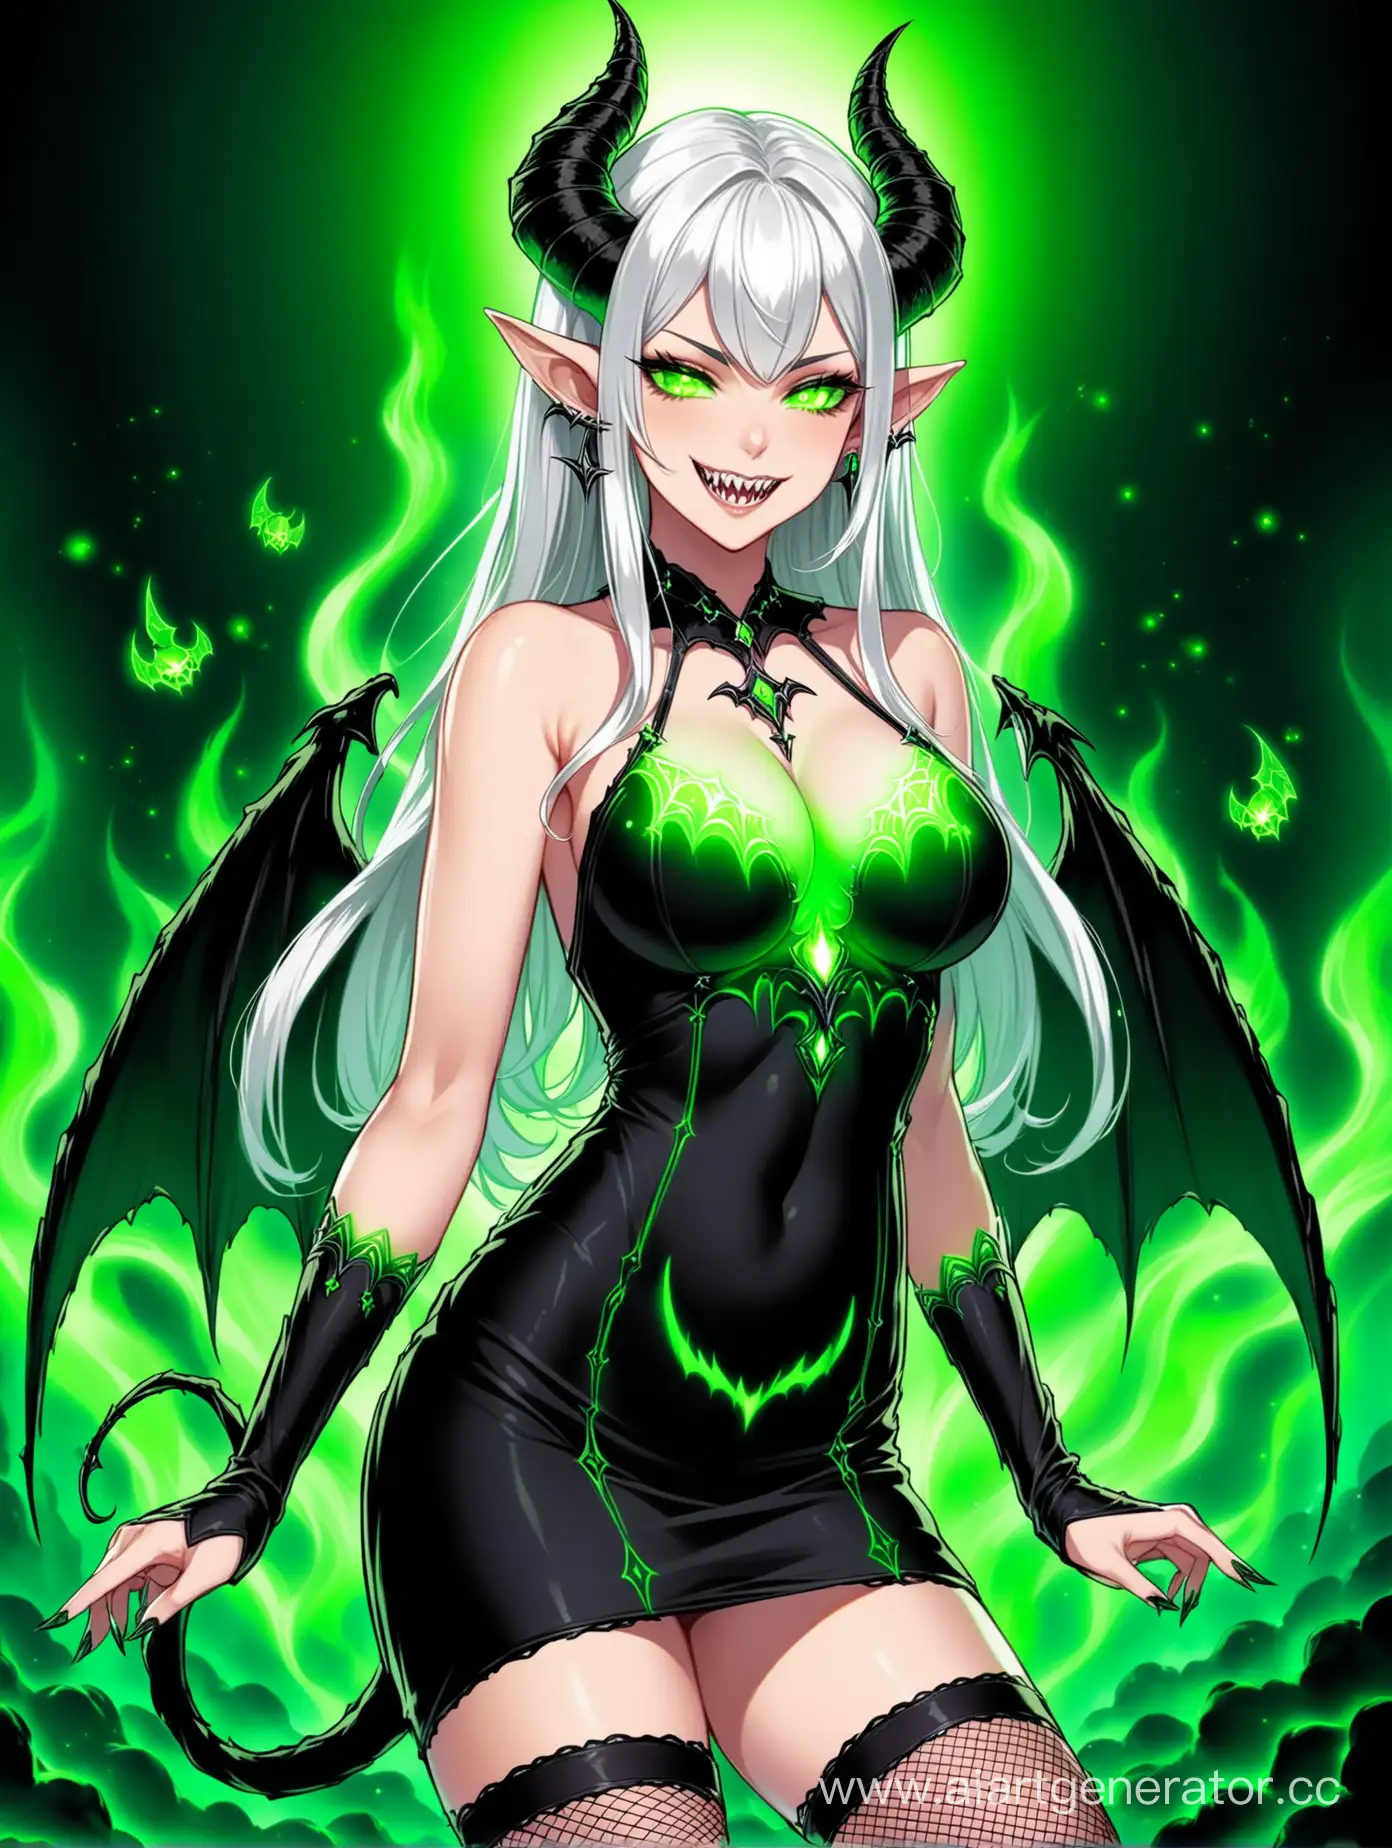 Succubus-Girl-with-White-Hair-and-Demonic-Features-in-Nuclear-Green-Aura